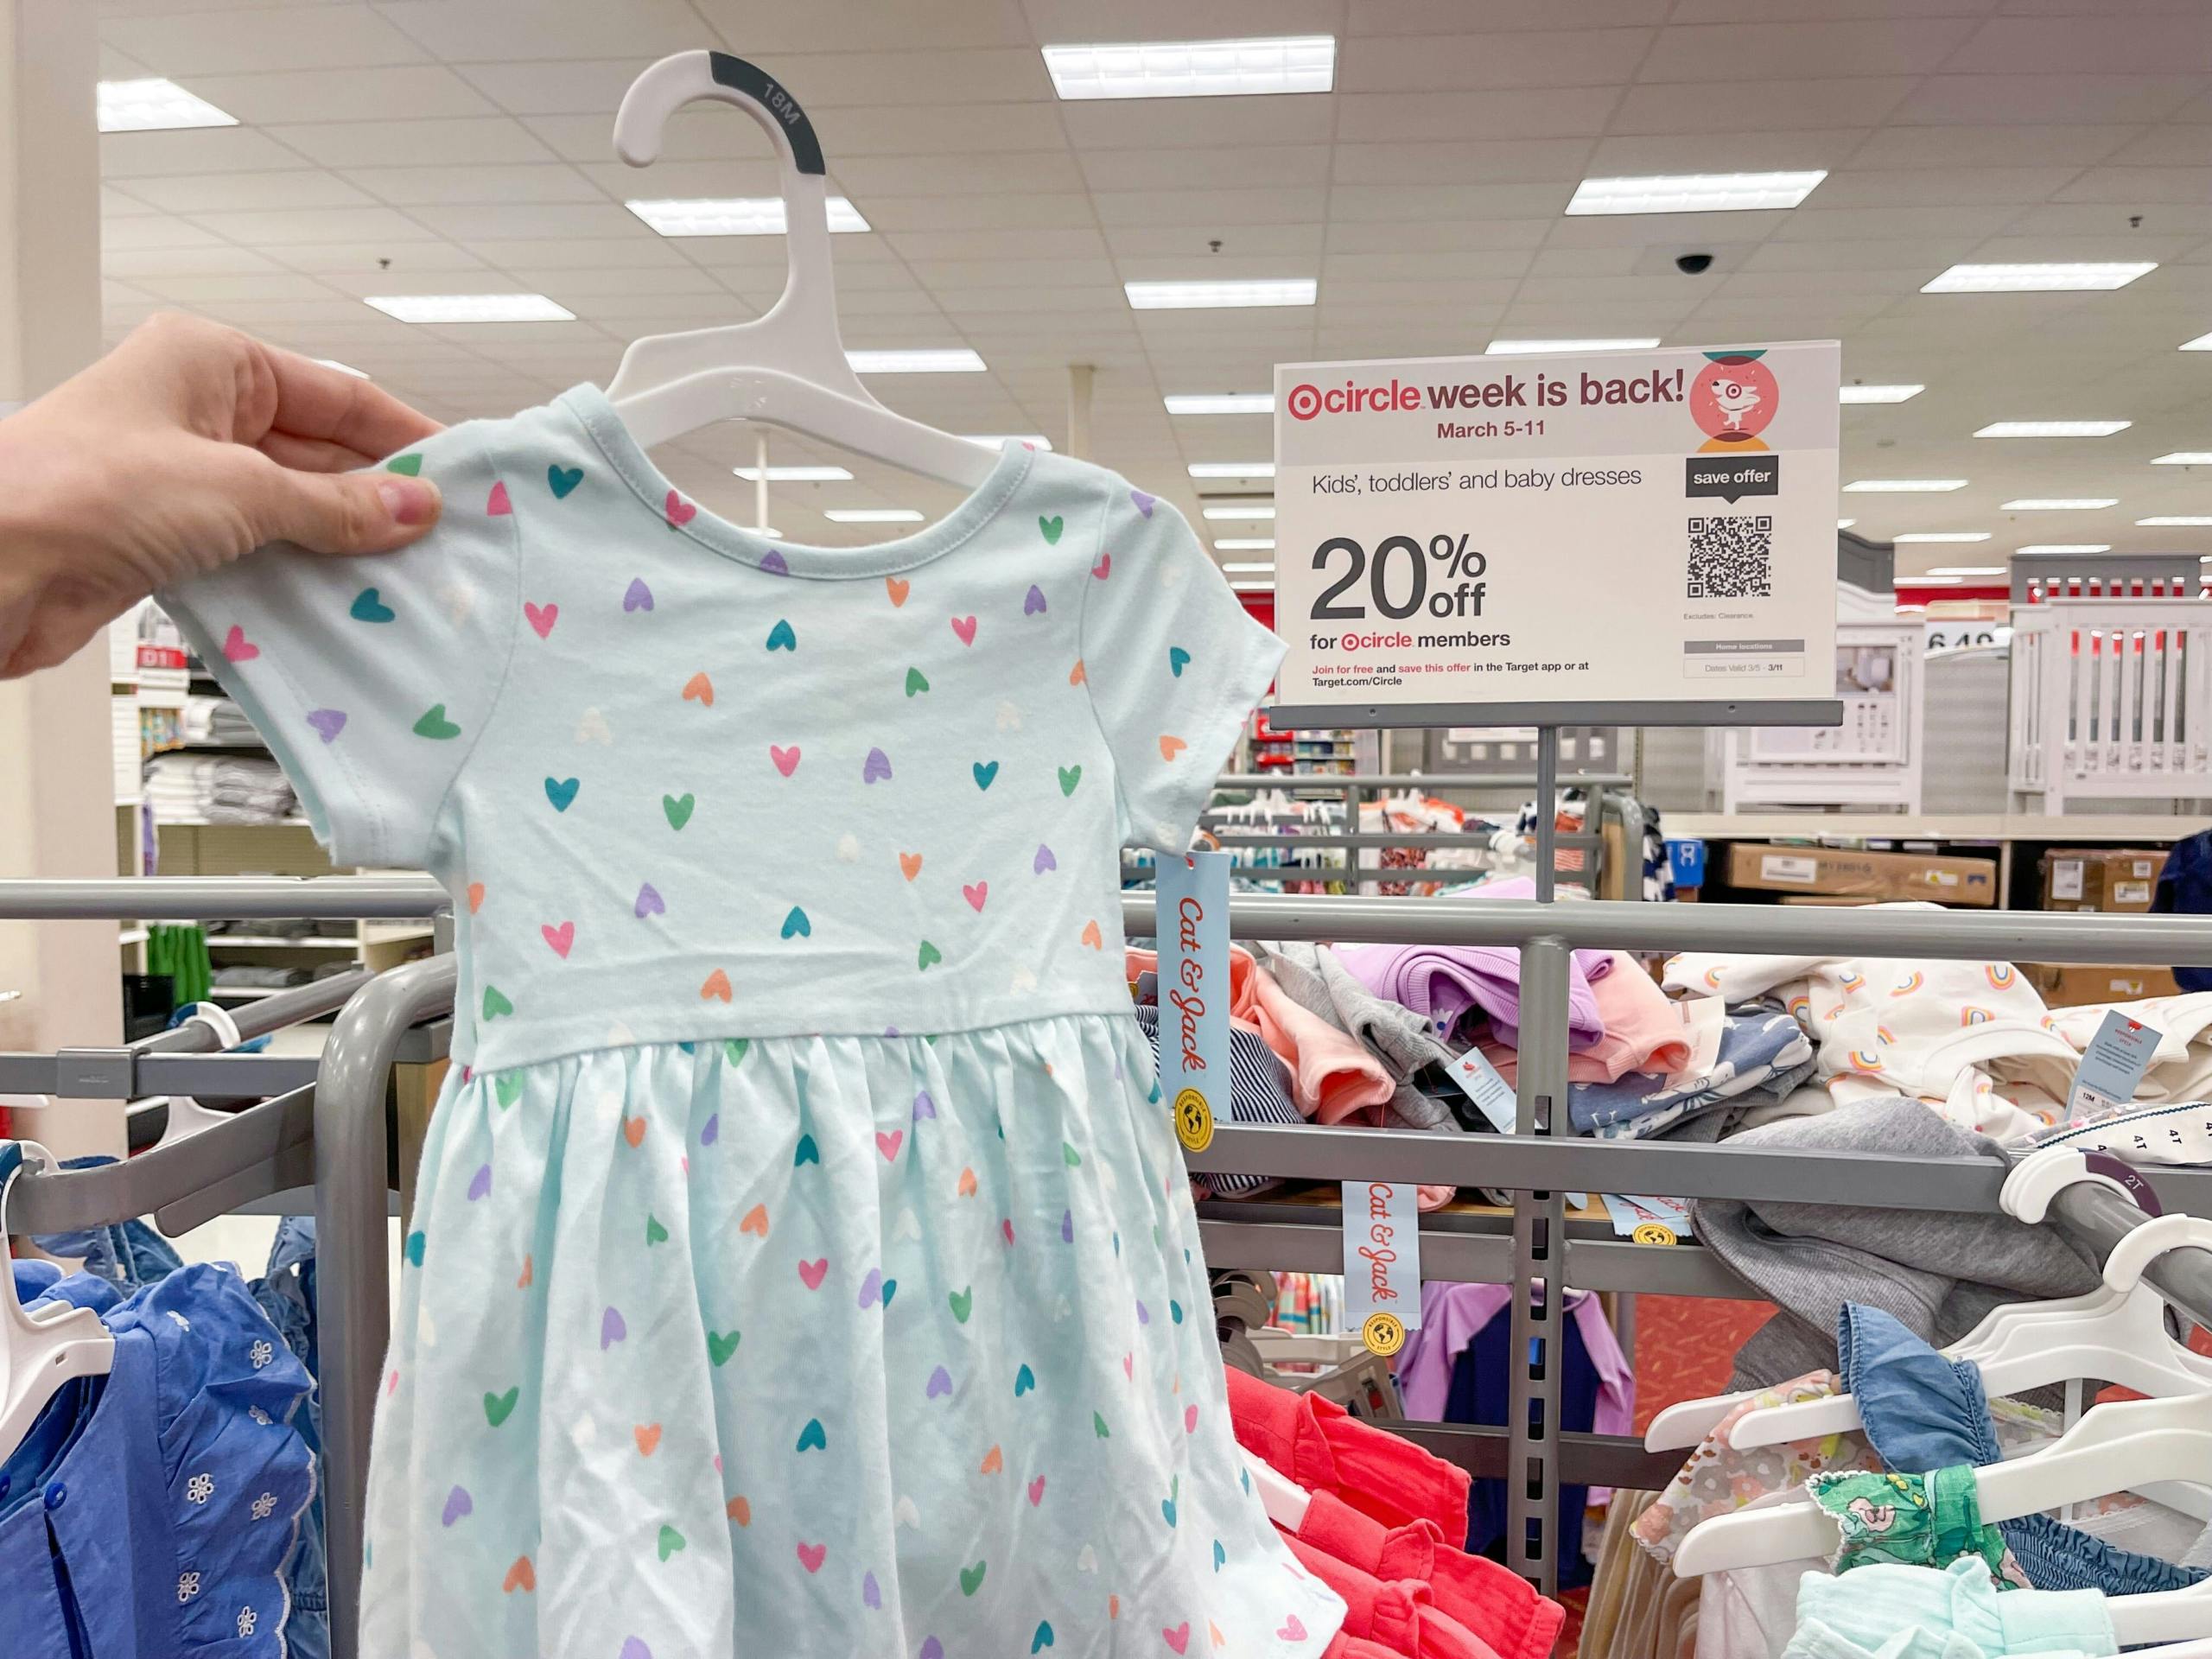 A toddler girls dress held out by hand in front of a sale sign.